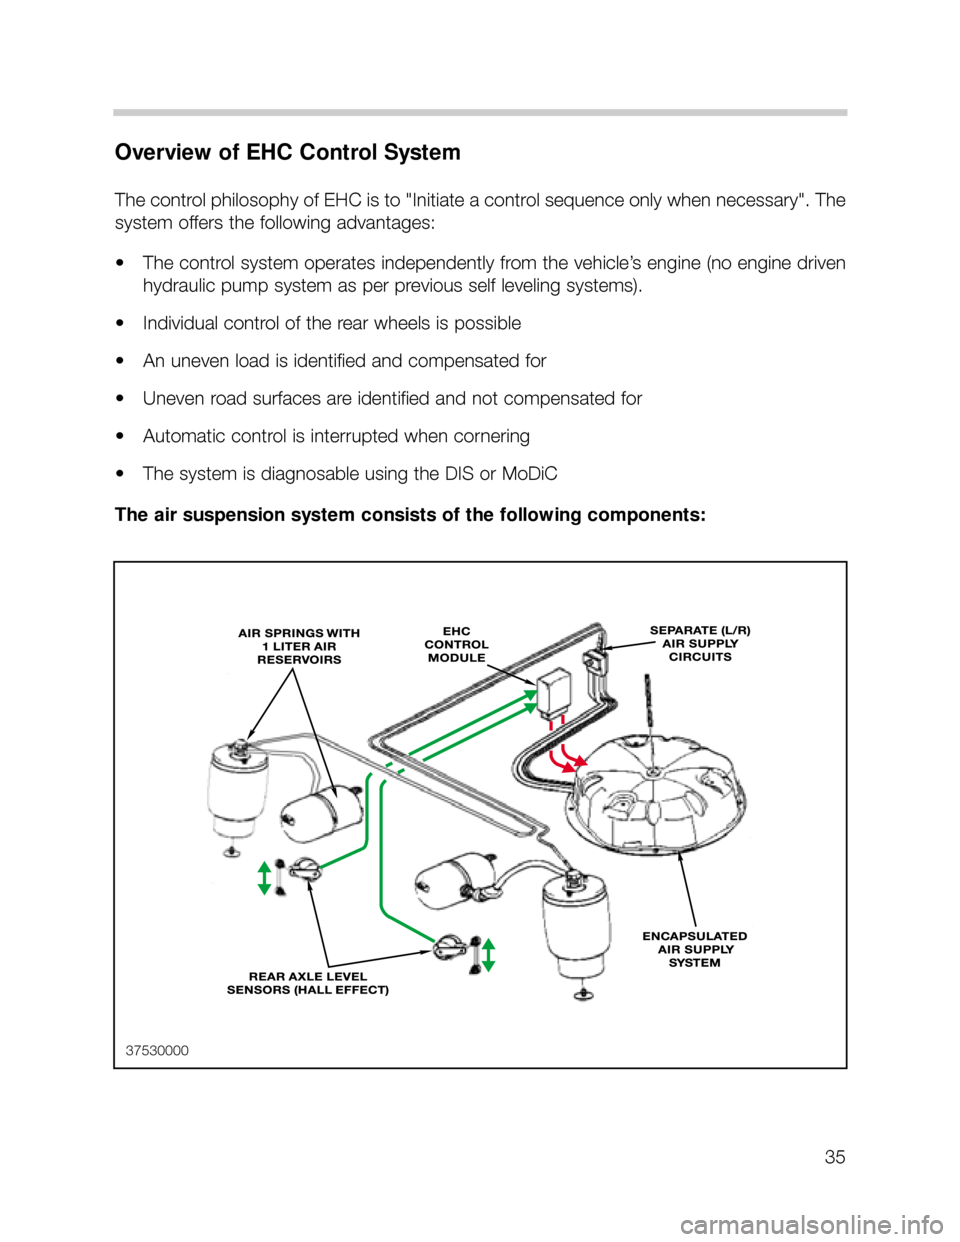 BMW X5 2002 E53 Workshop Manual 35
Overview of EHC Control System
The control philosophy of EHC is to "Initiate a control sequence only when necessary". The
system offers the following advantages:
• The control system operates ind